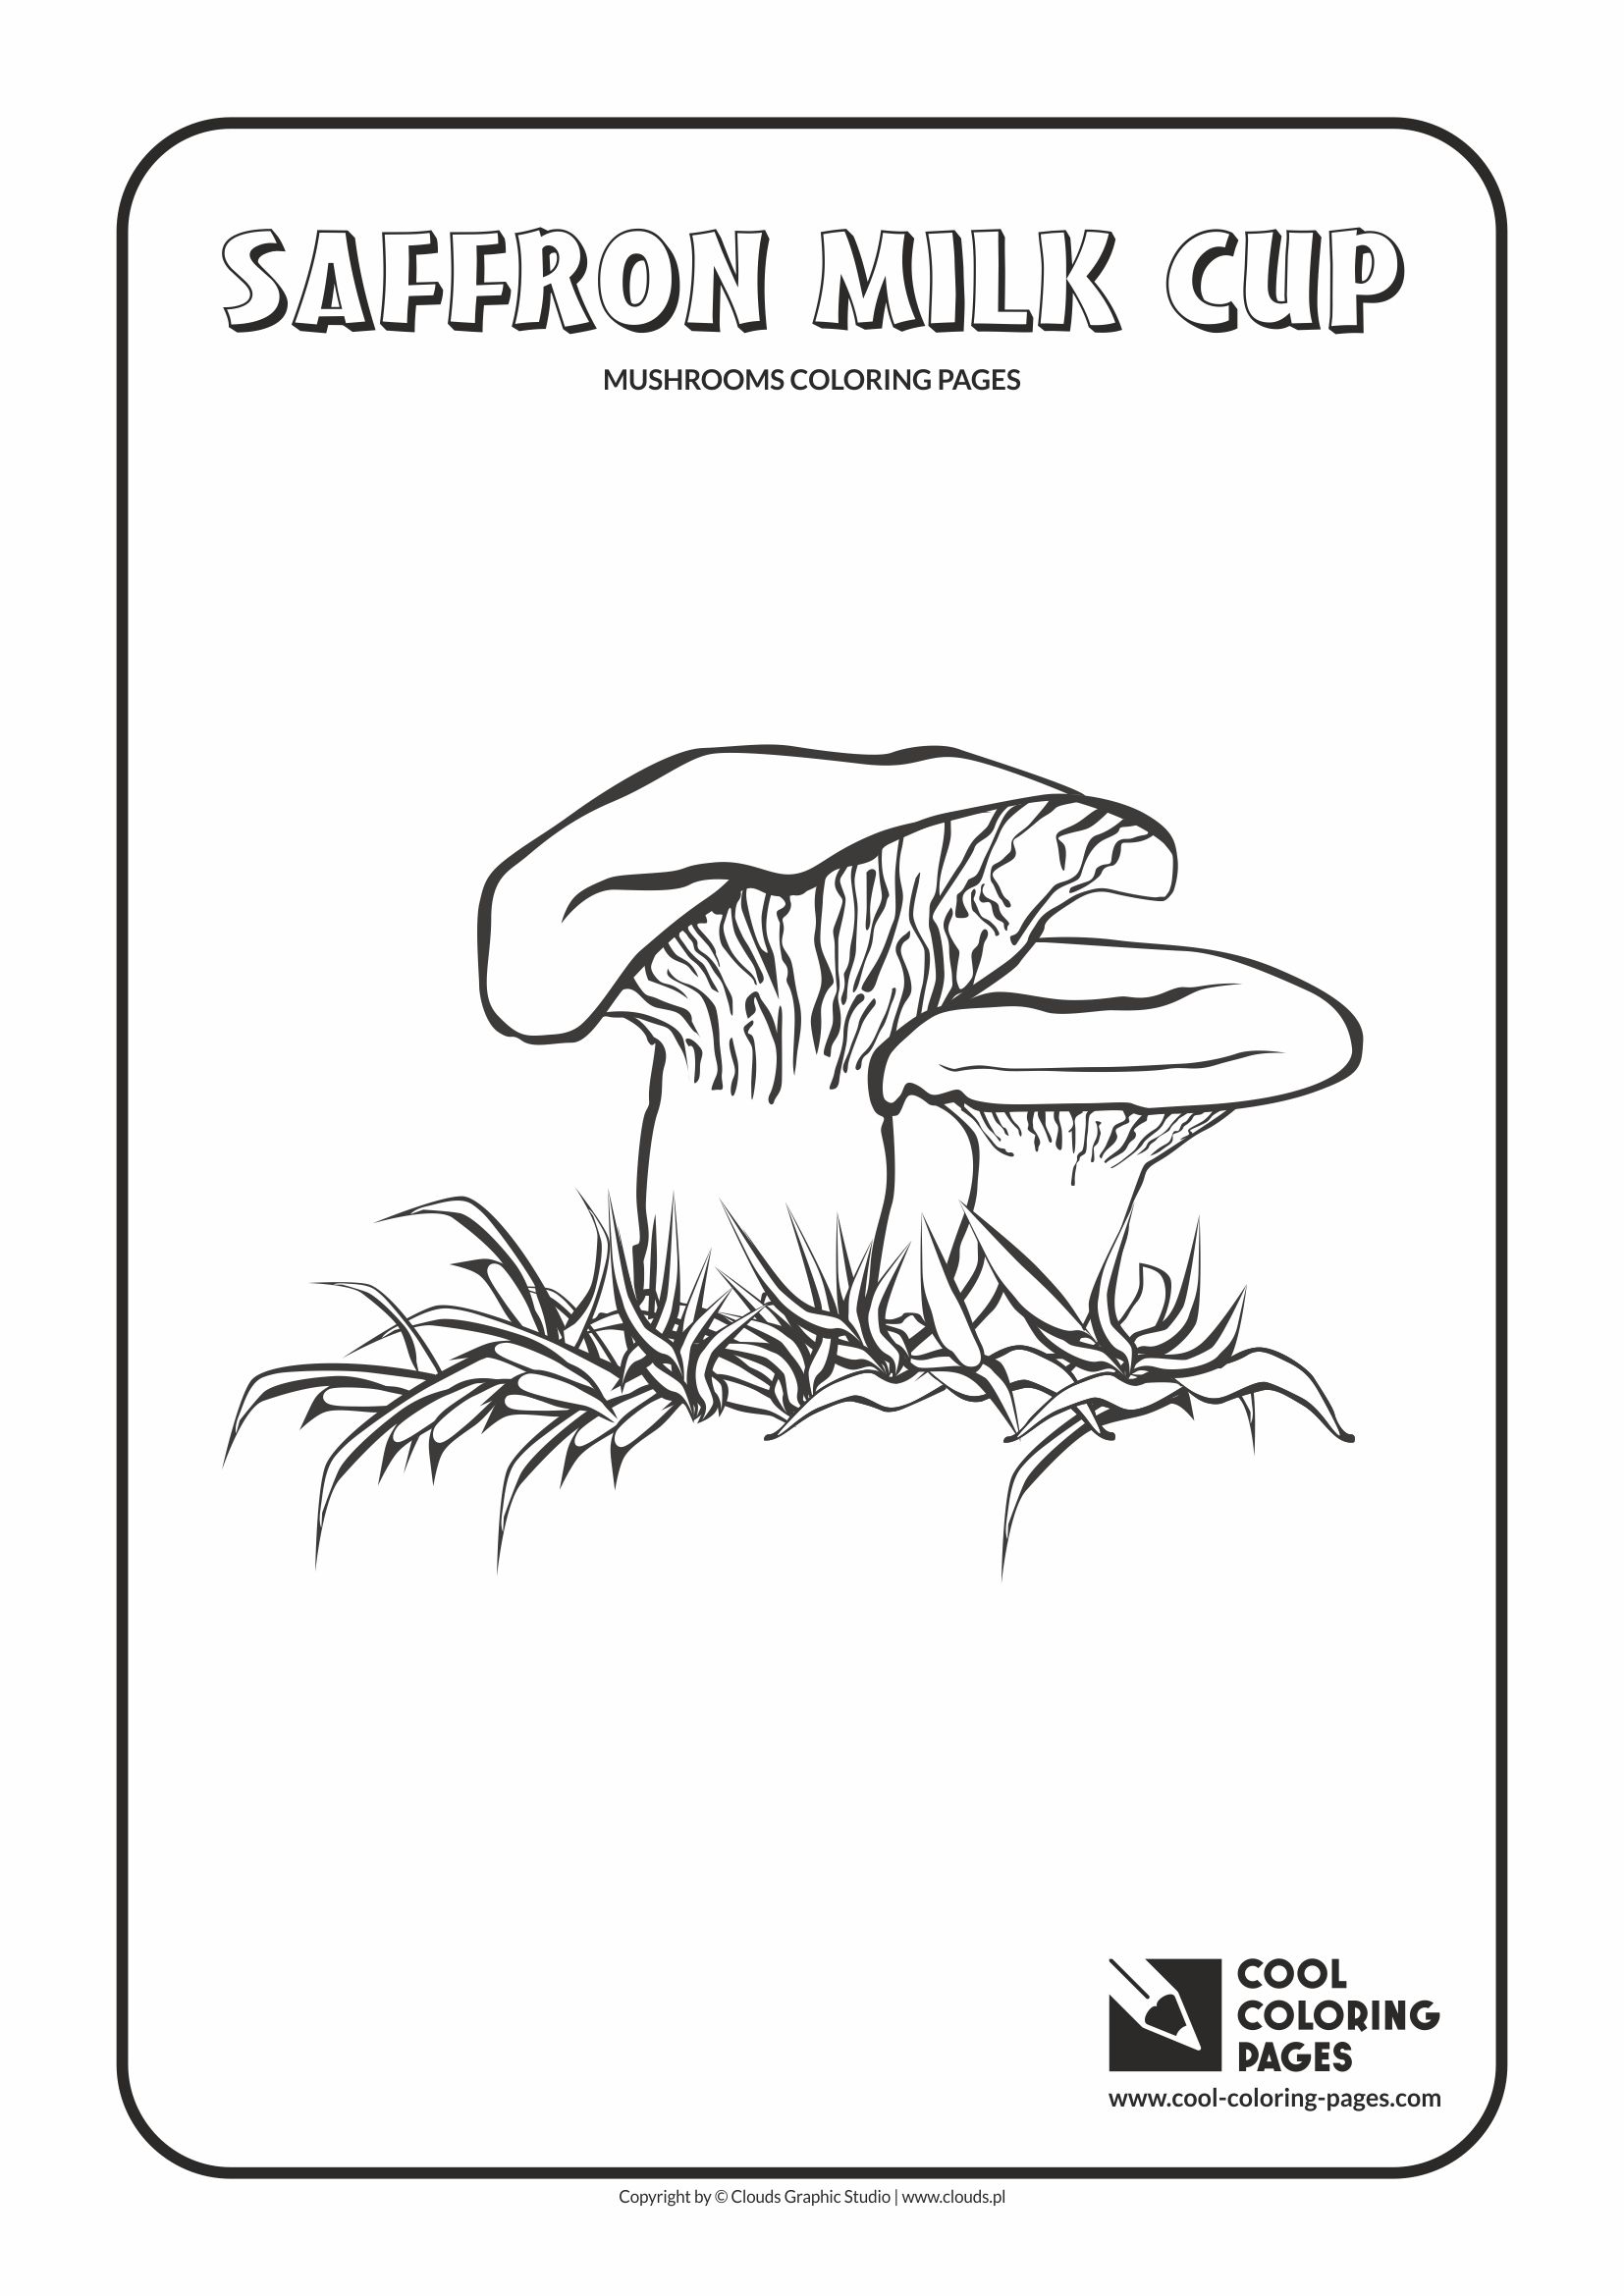 Cool Coloring Pages Mushrooms coloring pages   Cool Coloring Pages ...